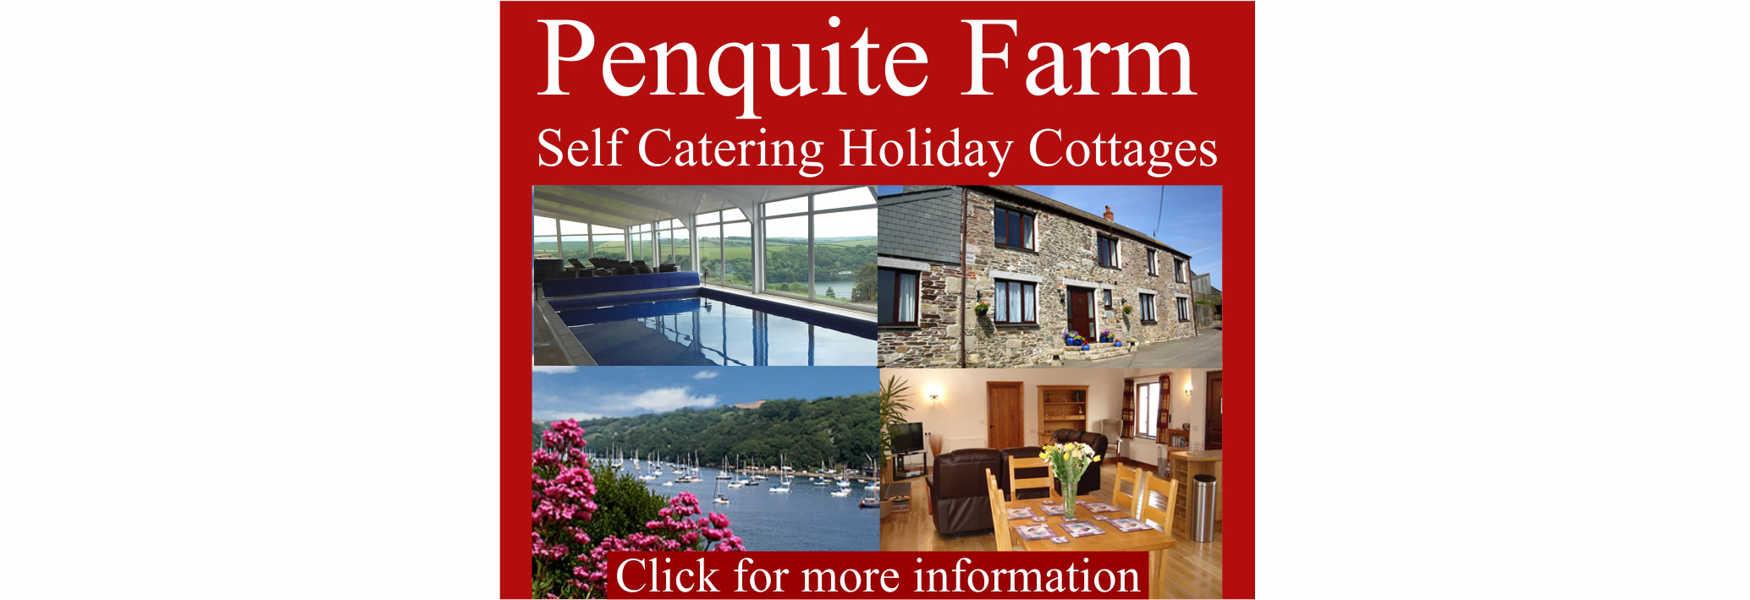 Penquite Farm. Self Catering Cottages - click for more information